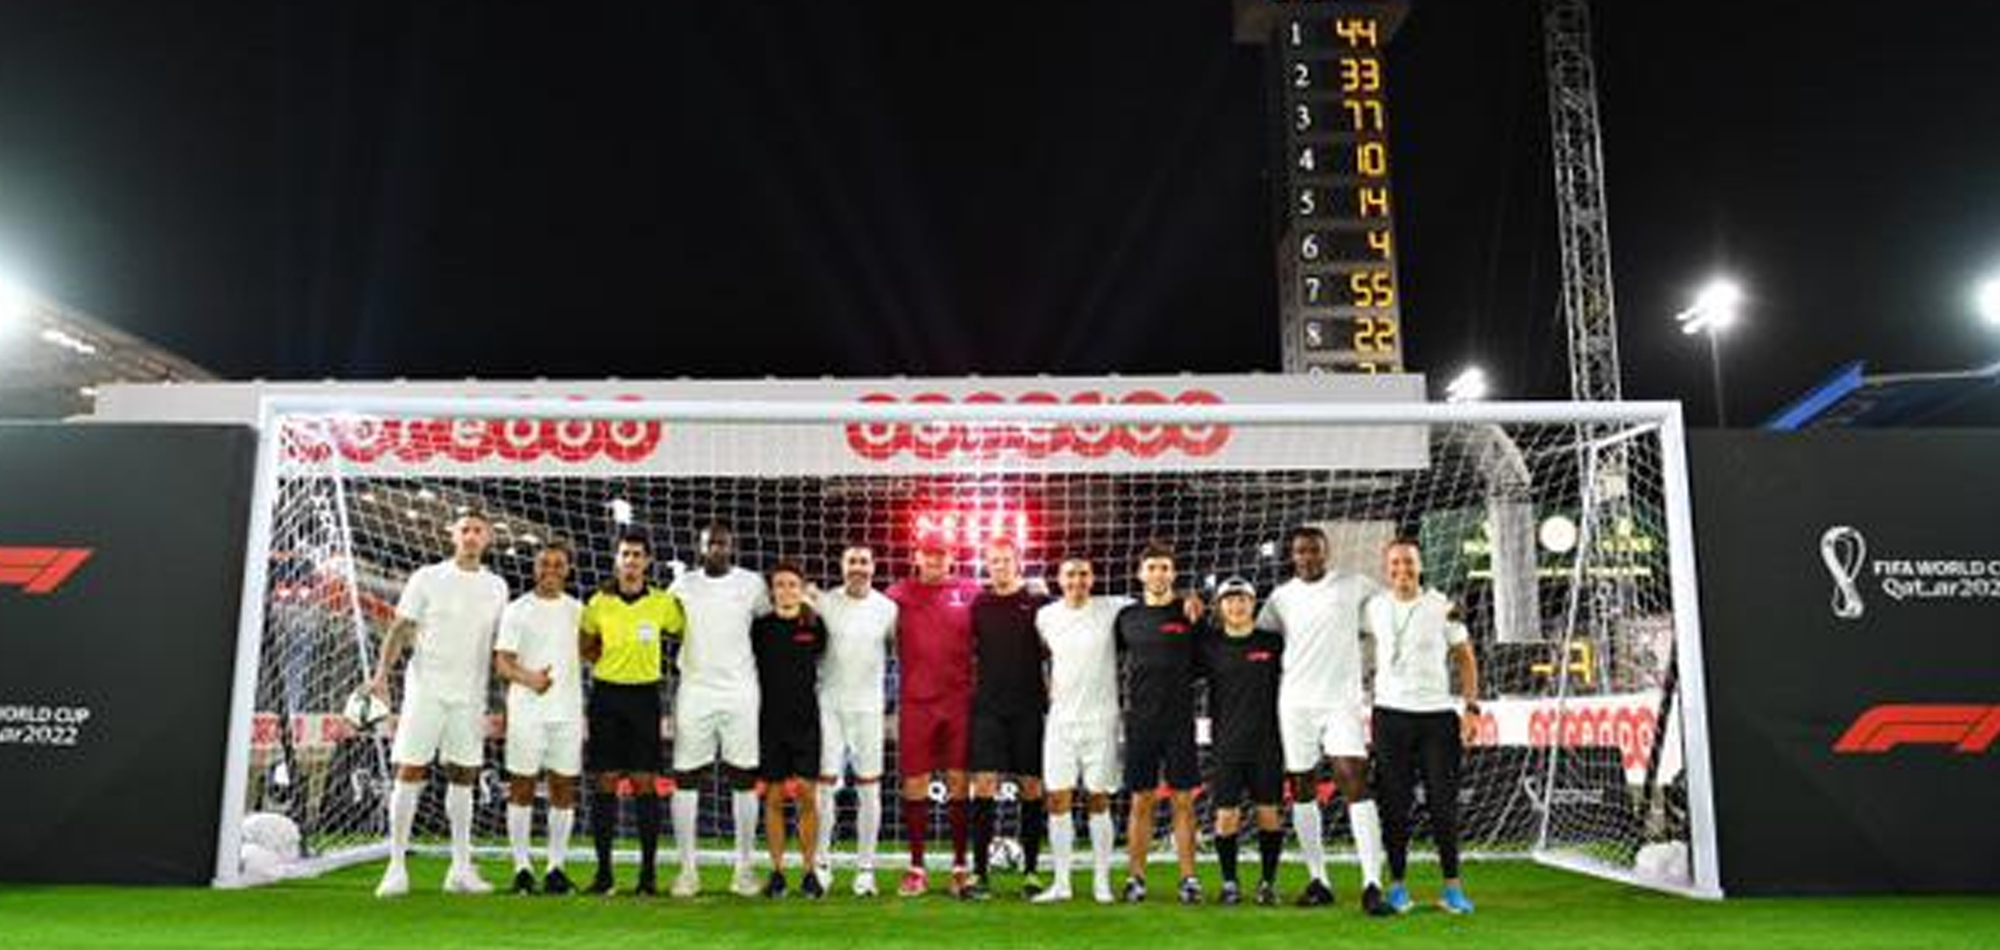 FIFA, F1 COME TOGETHER IN PENALTY SHOOTOUT AT LCSC